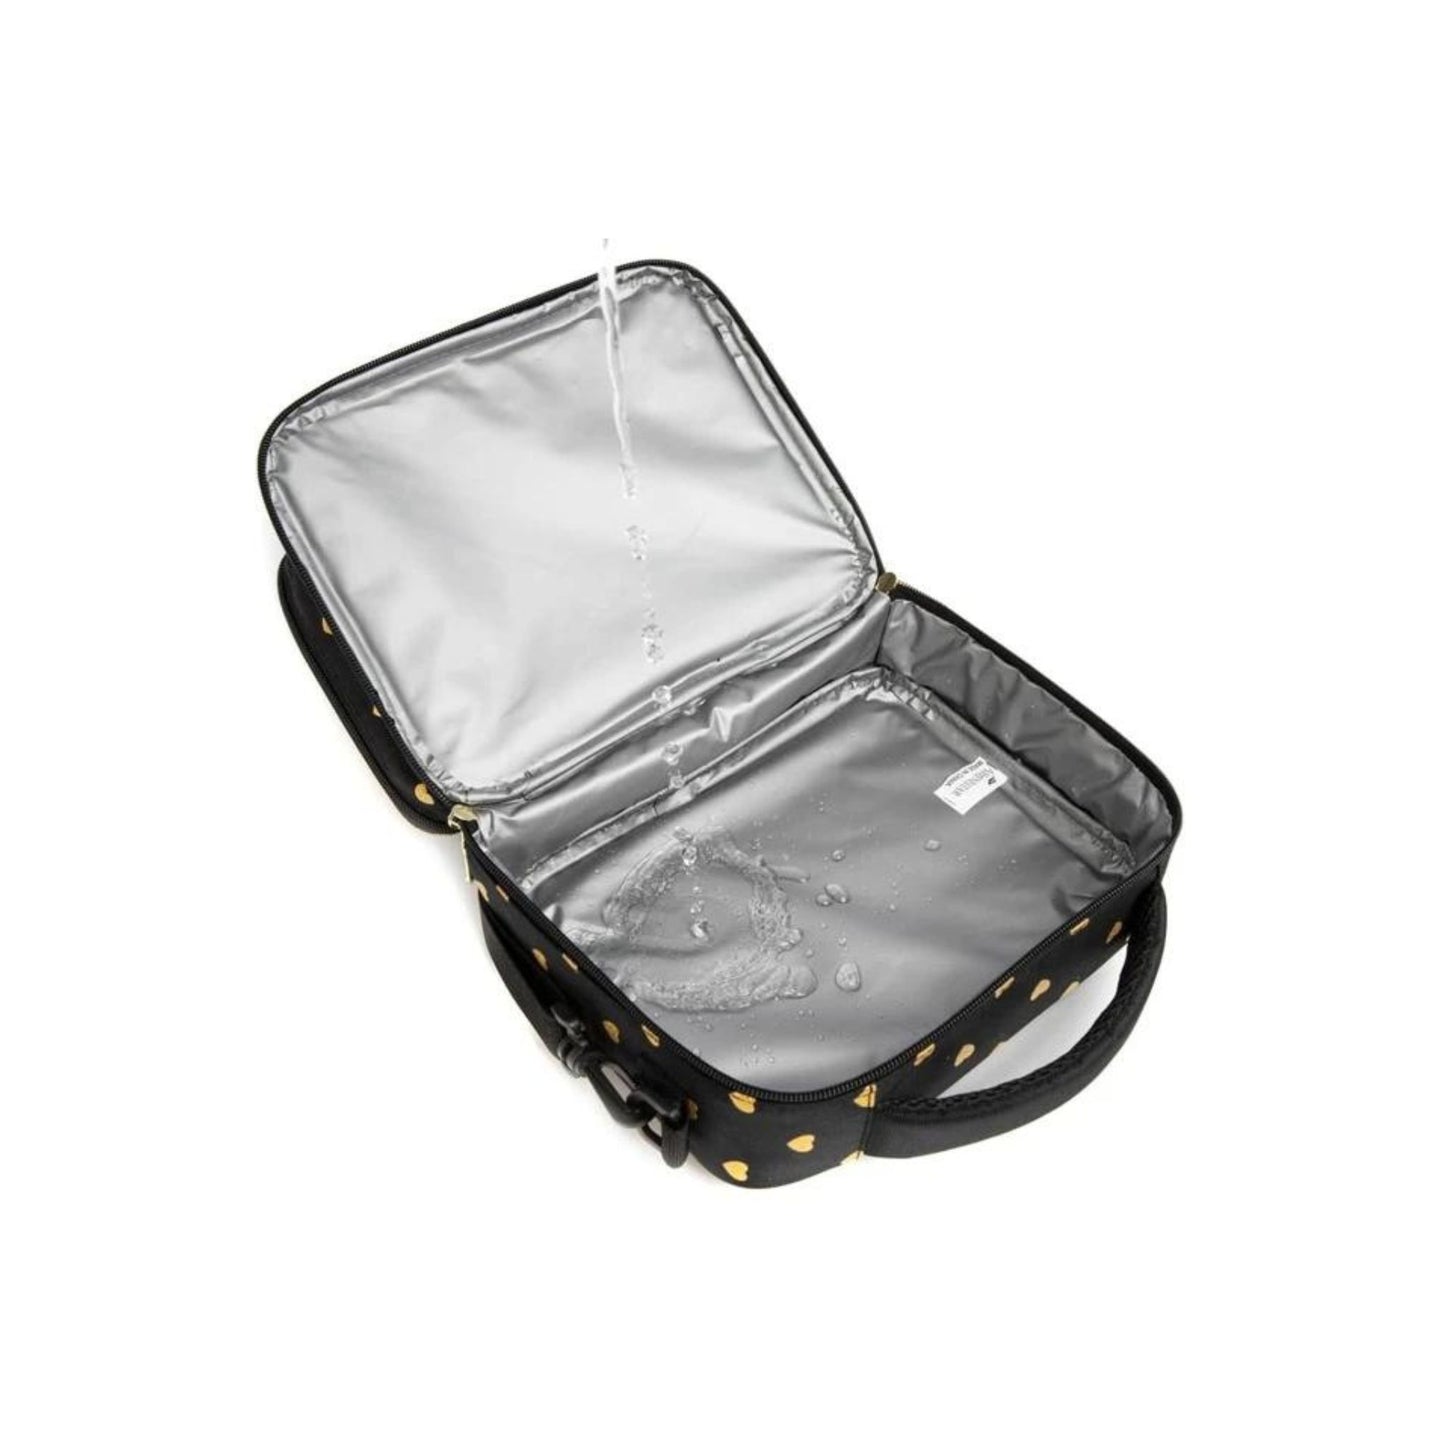 Black & Gold Heart Print Insulated Lunch Bag